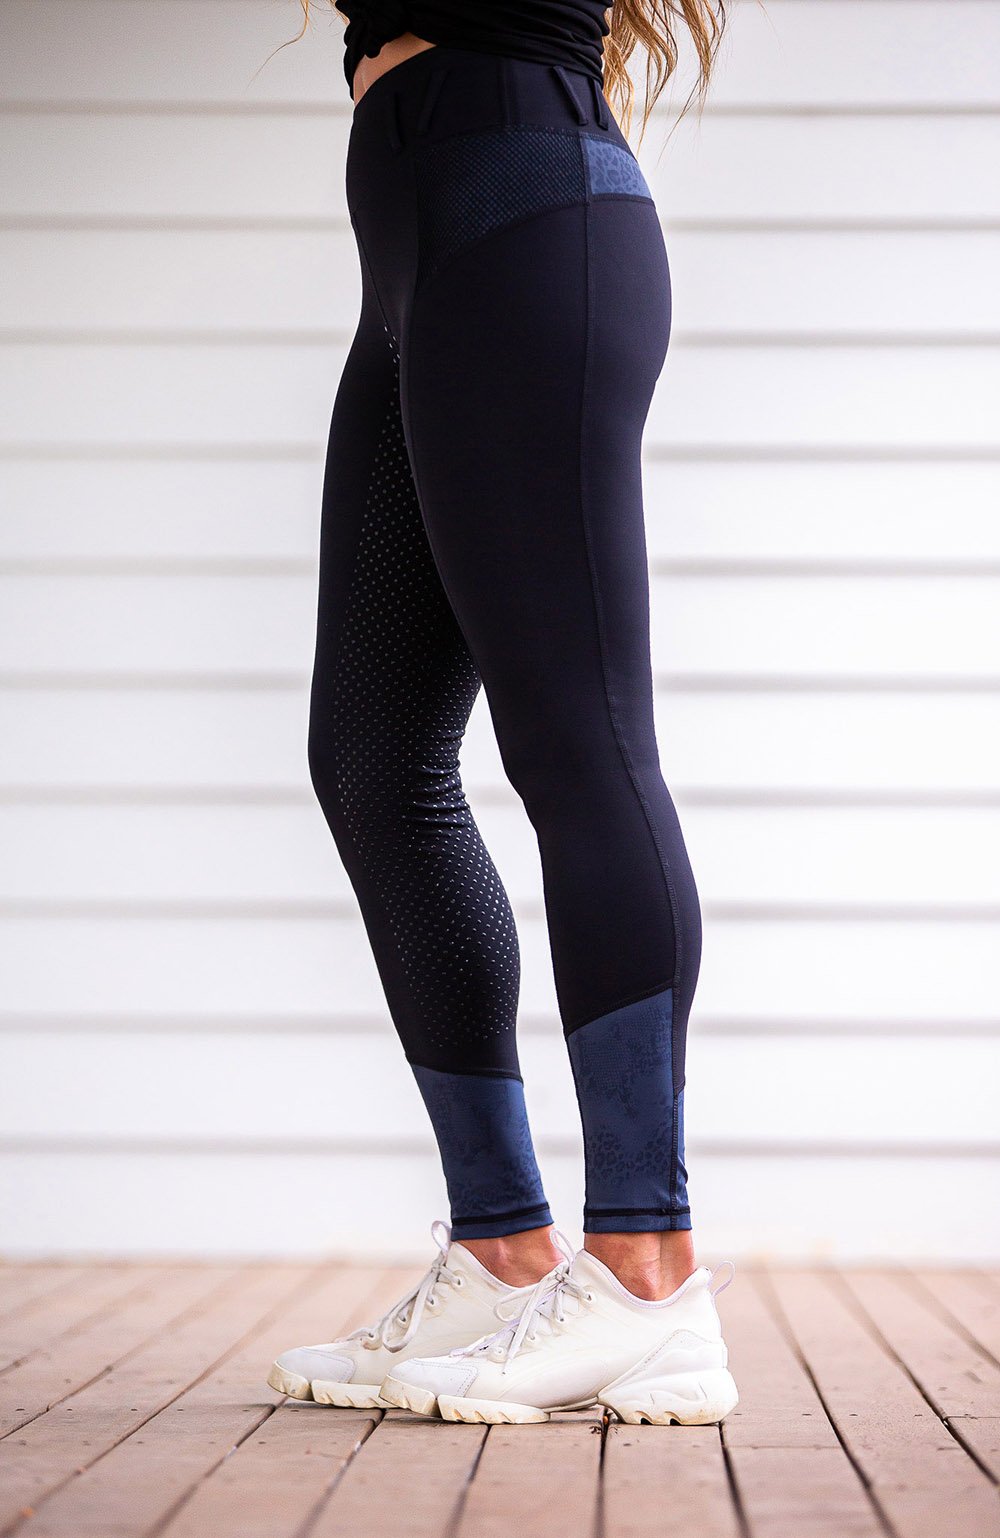 BARE Youth Performance Riding Tights - Old Navy